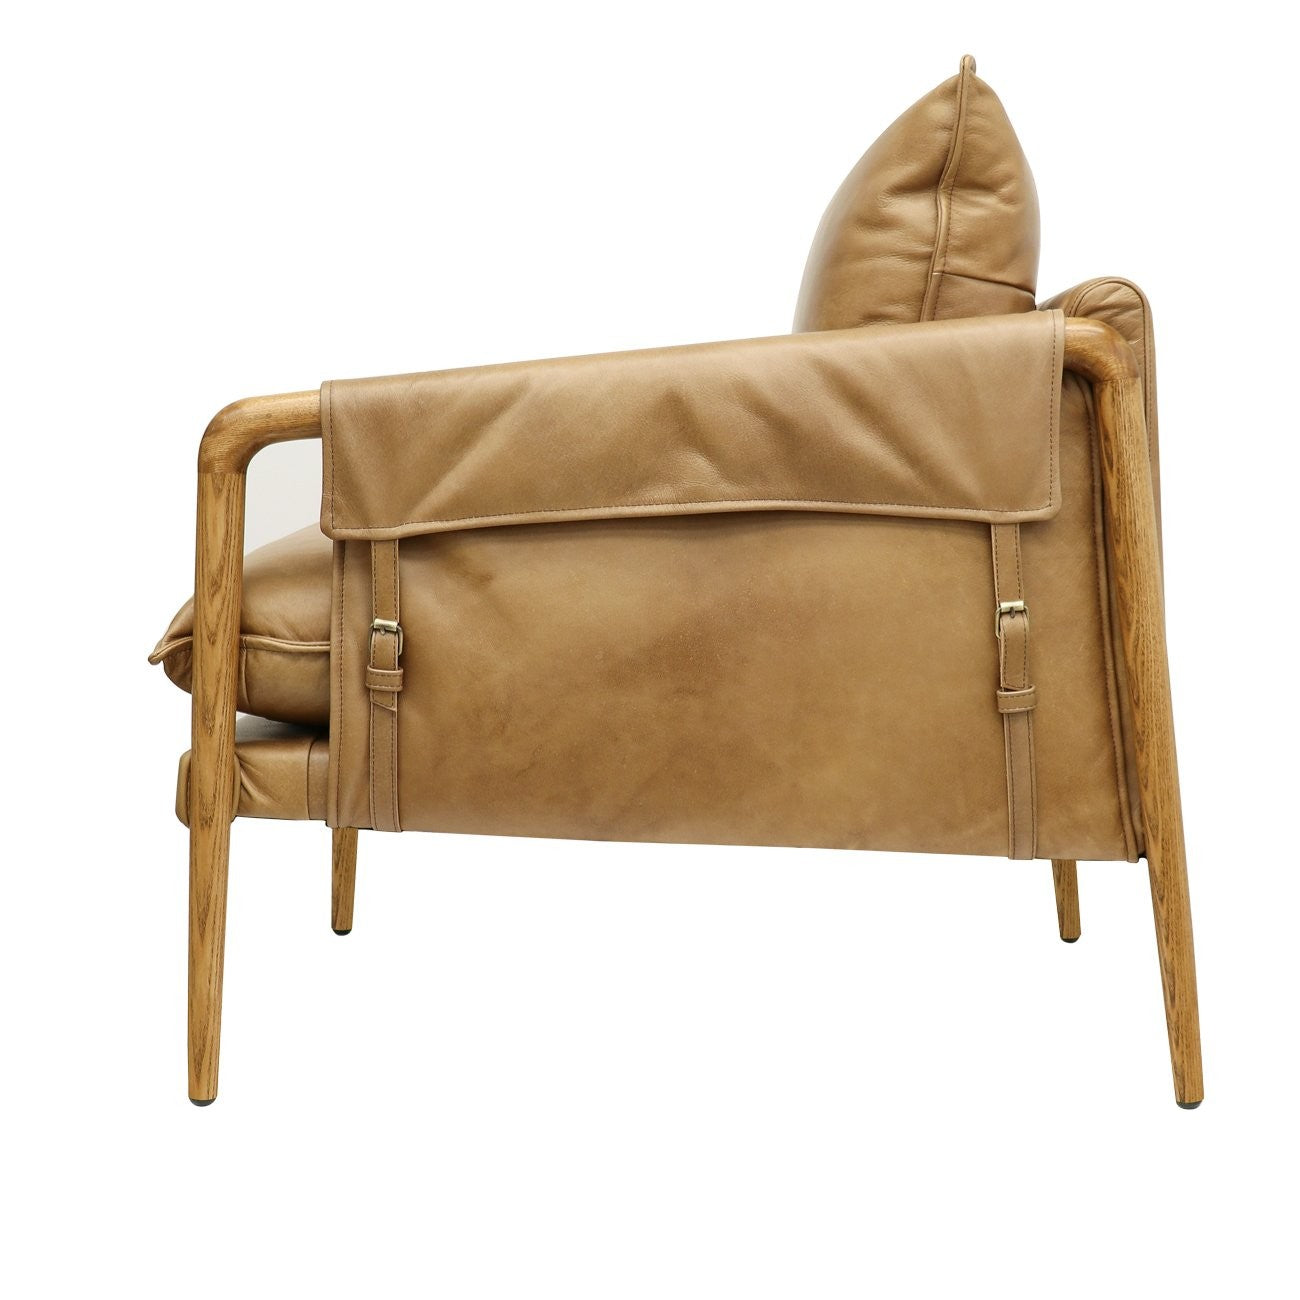 Saddle Occasional Chair - Tan Leather